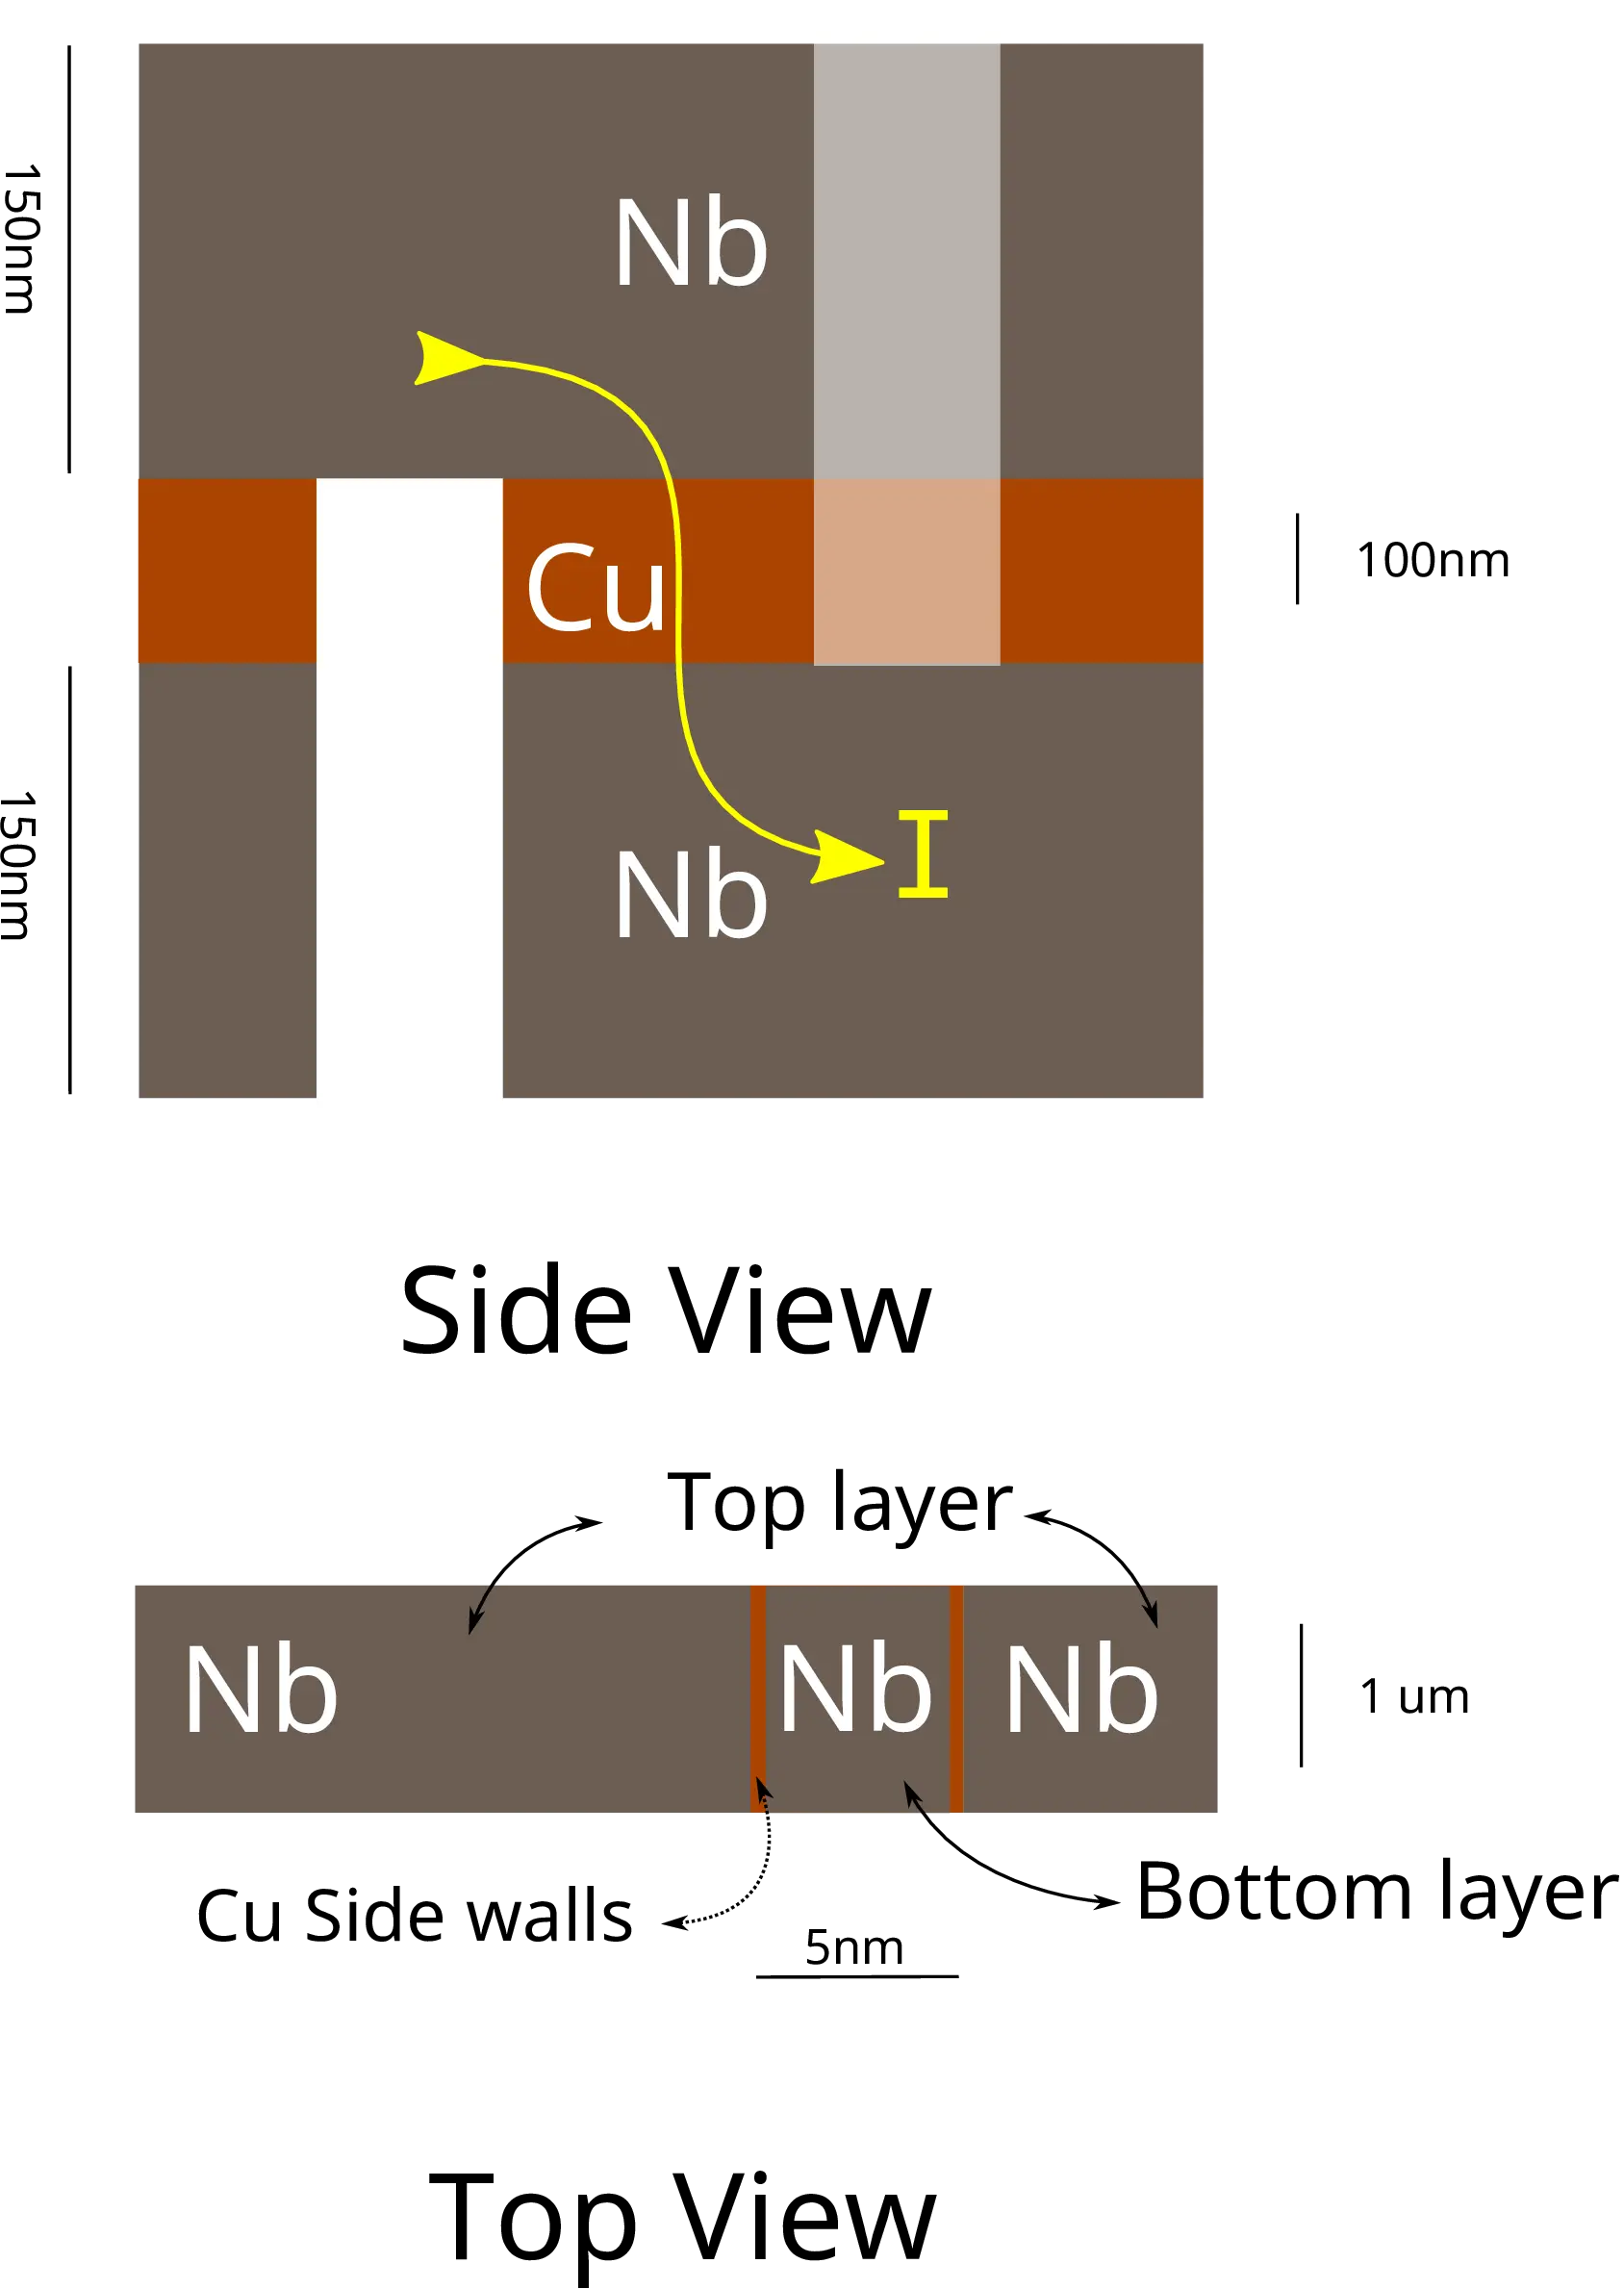 Schematic of the Vertical Josephson Junction, due to the nano pillar cuts on the left and the right, the current travels in plane through first the top Niobium layer then through the copper weaklink then finally through the other Niobium layer. The yellow arrowed line shows the direction of current flow